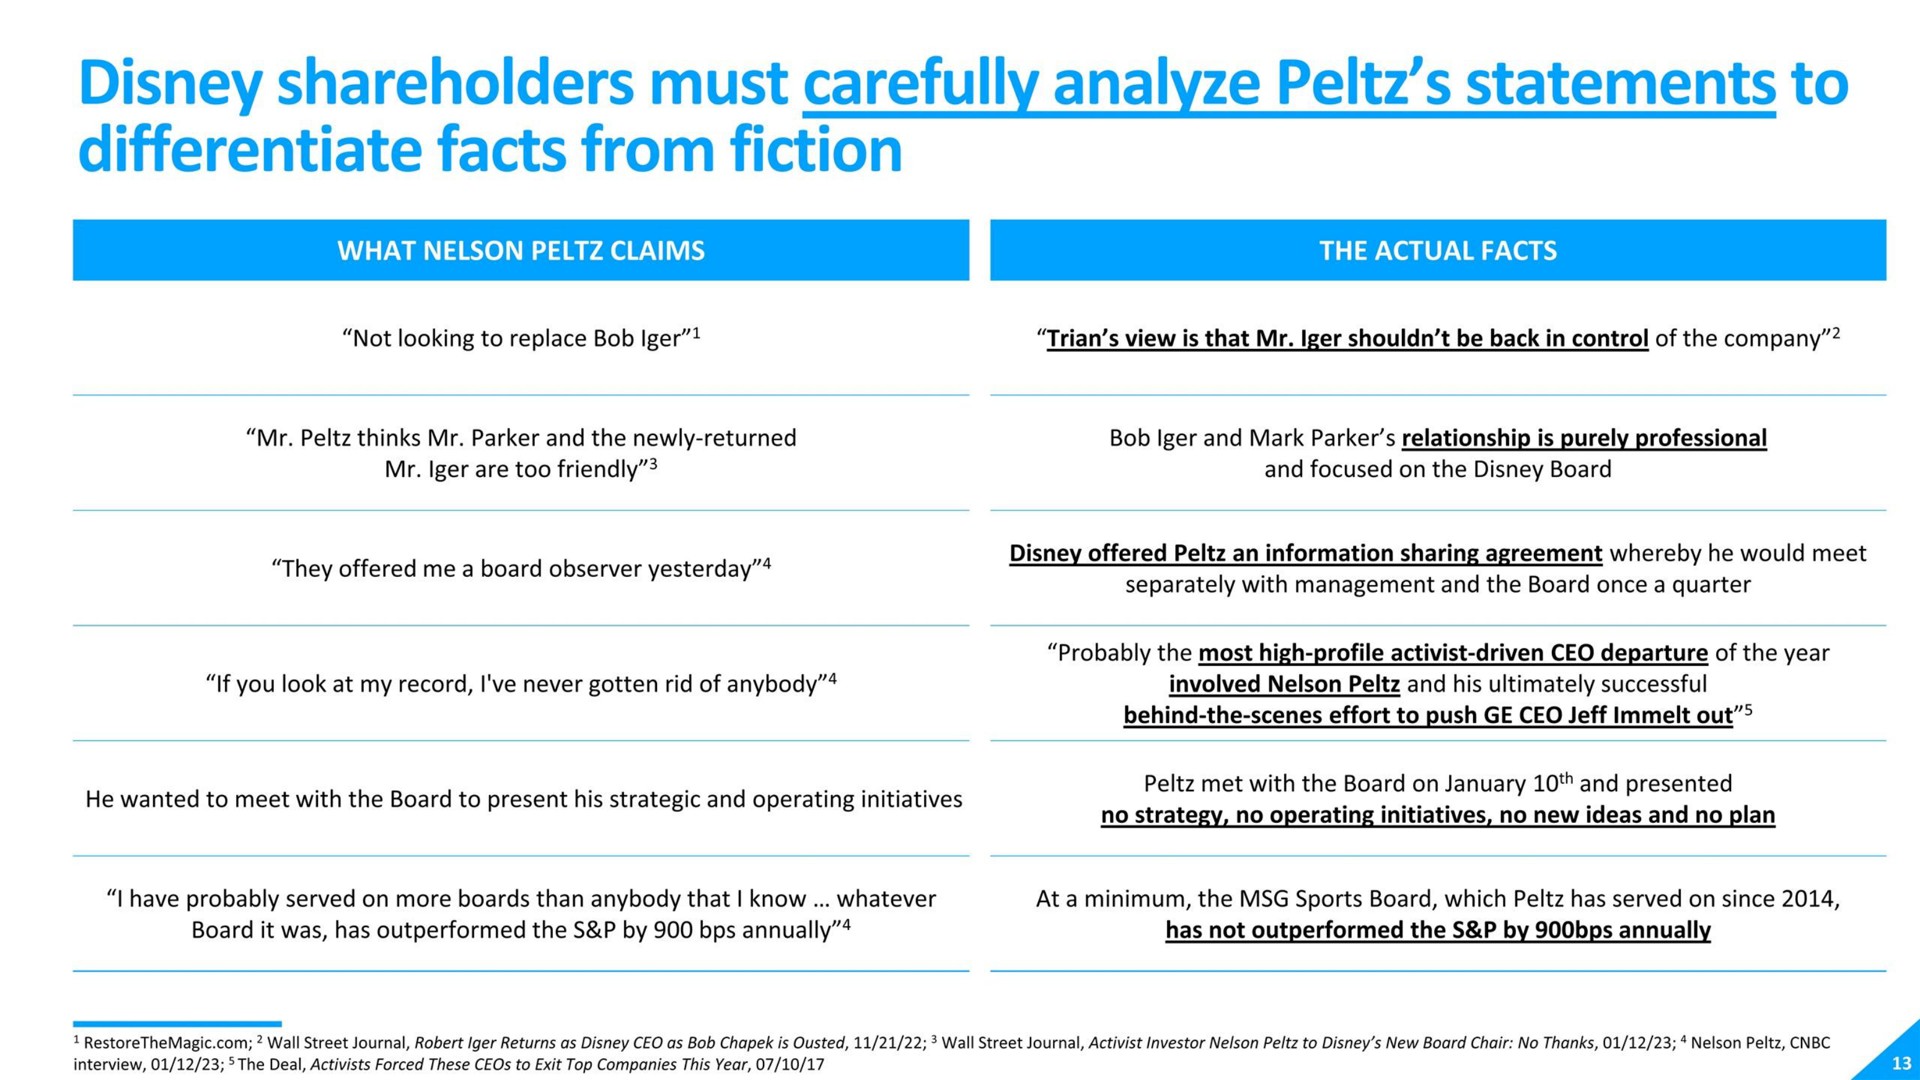 shareholders must carefully analyze statements to differentiate facts from fiction | Disney